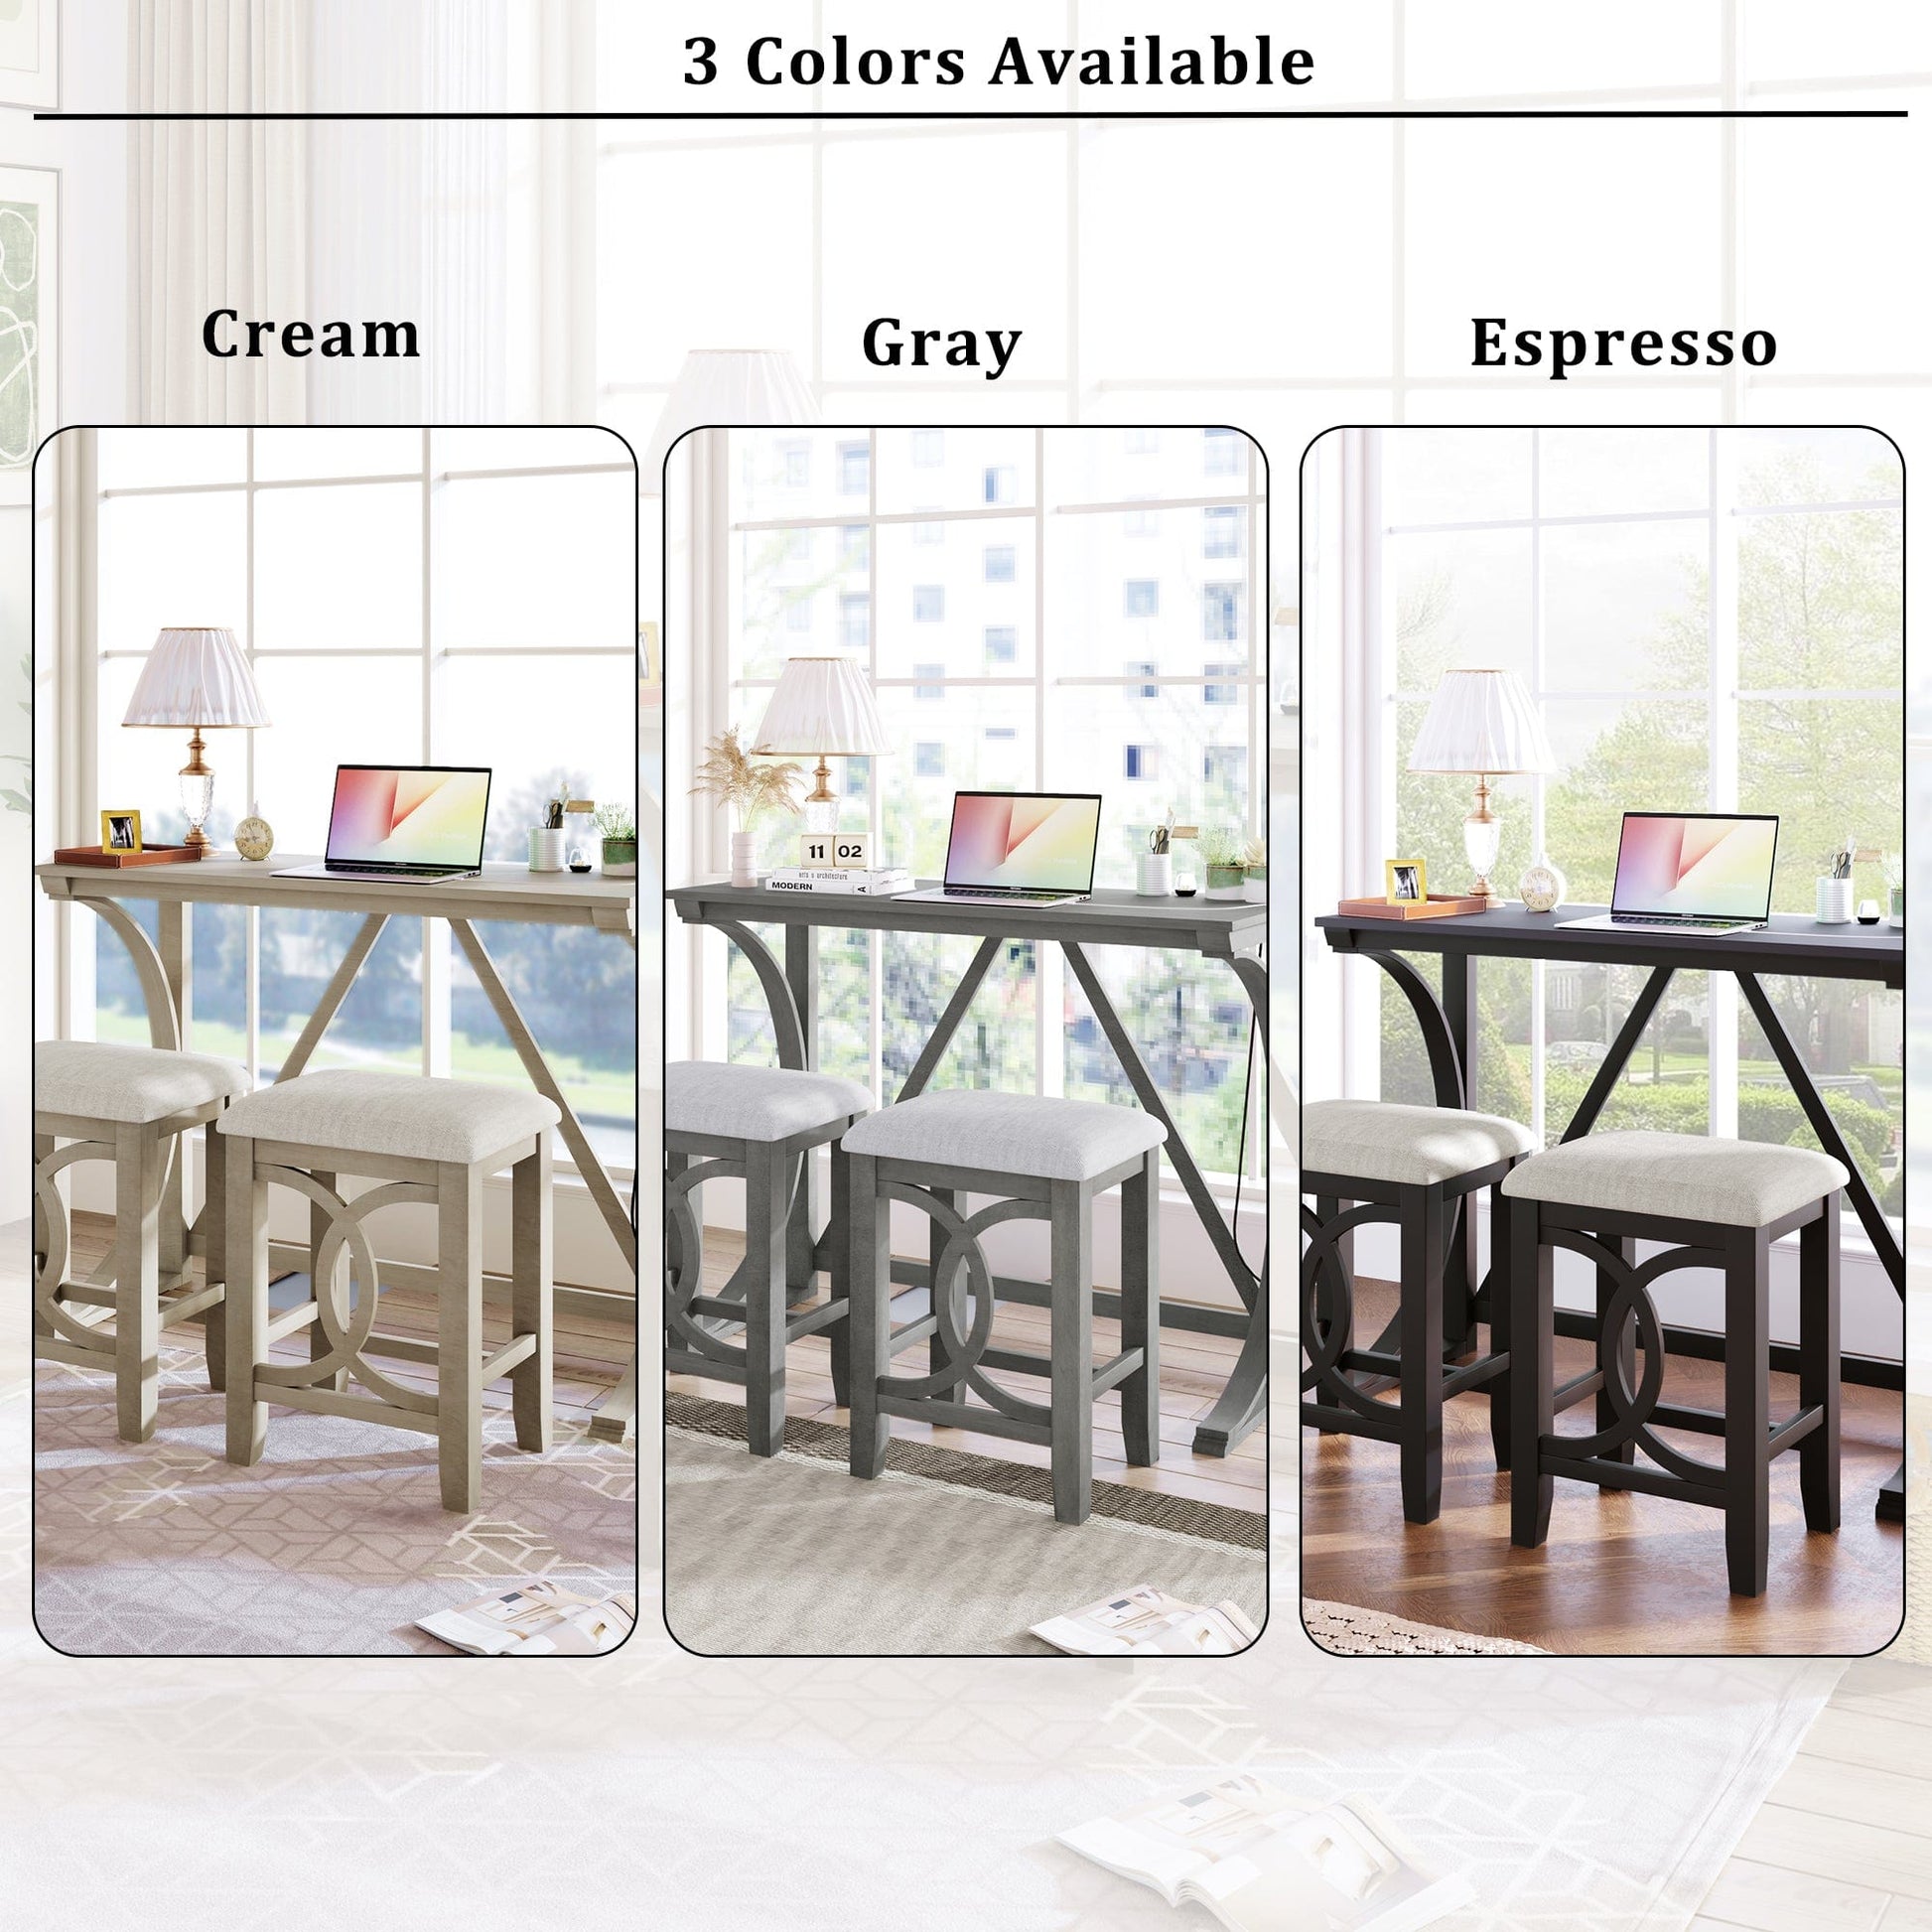 1st Choice Furniture Direct Counter Height Set 1st Choice Farmhouse 3-Pc Counter Height Dining Set w/ USB & Stools